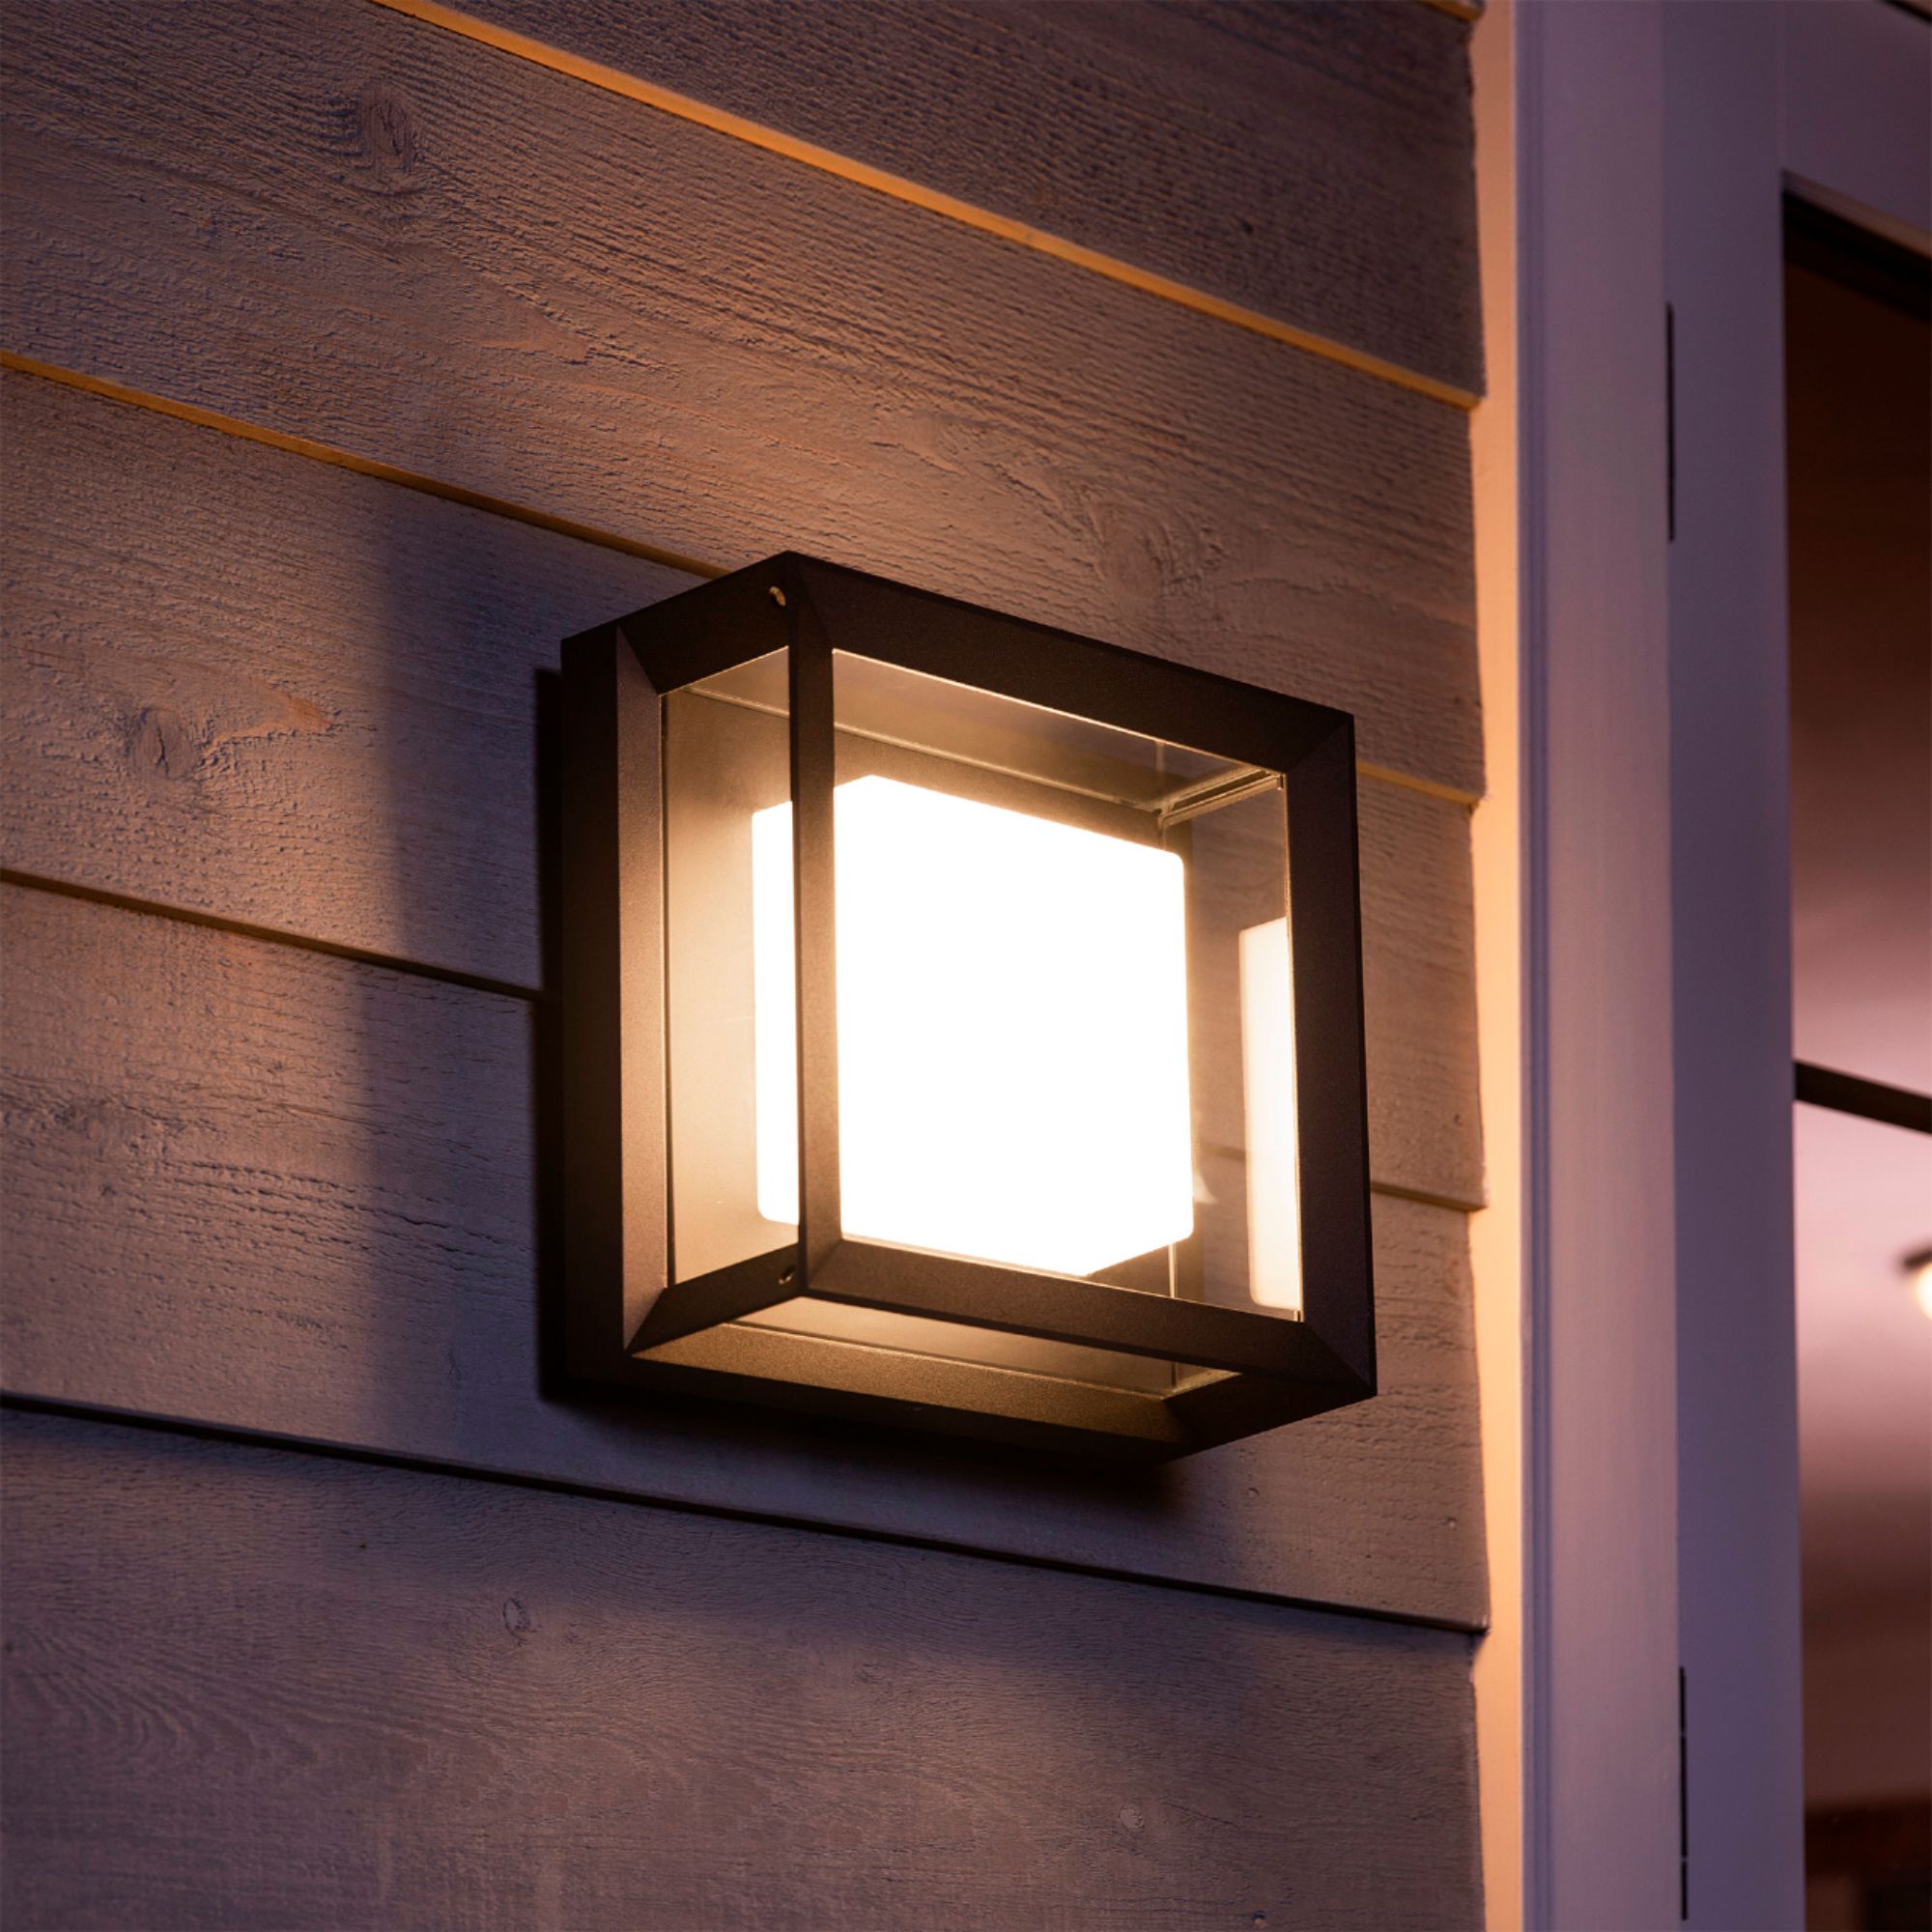 Left View: Philips - Hue Econic Outdoor Wall and Ceiling Light - White and Color Ambiance